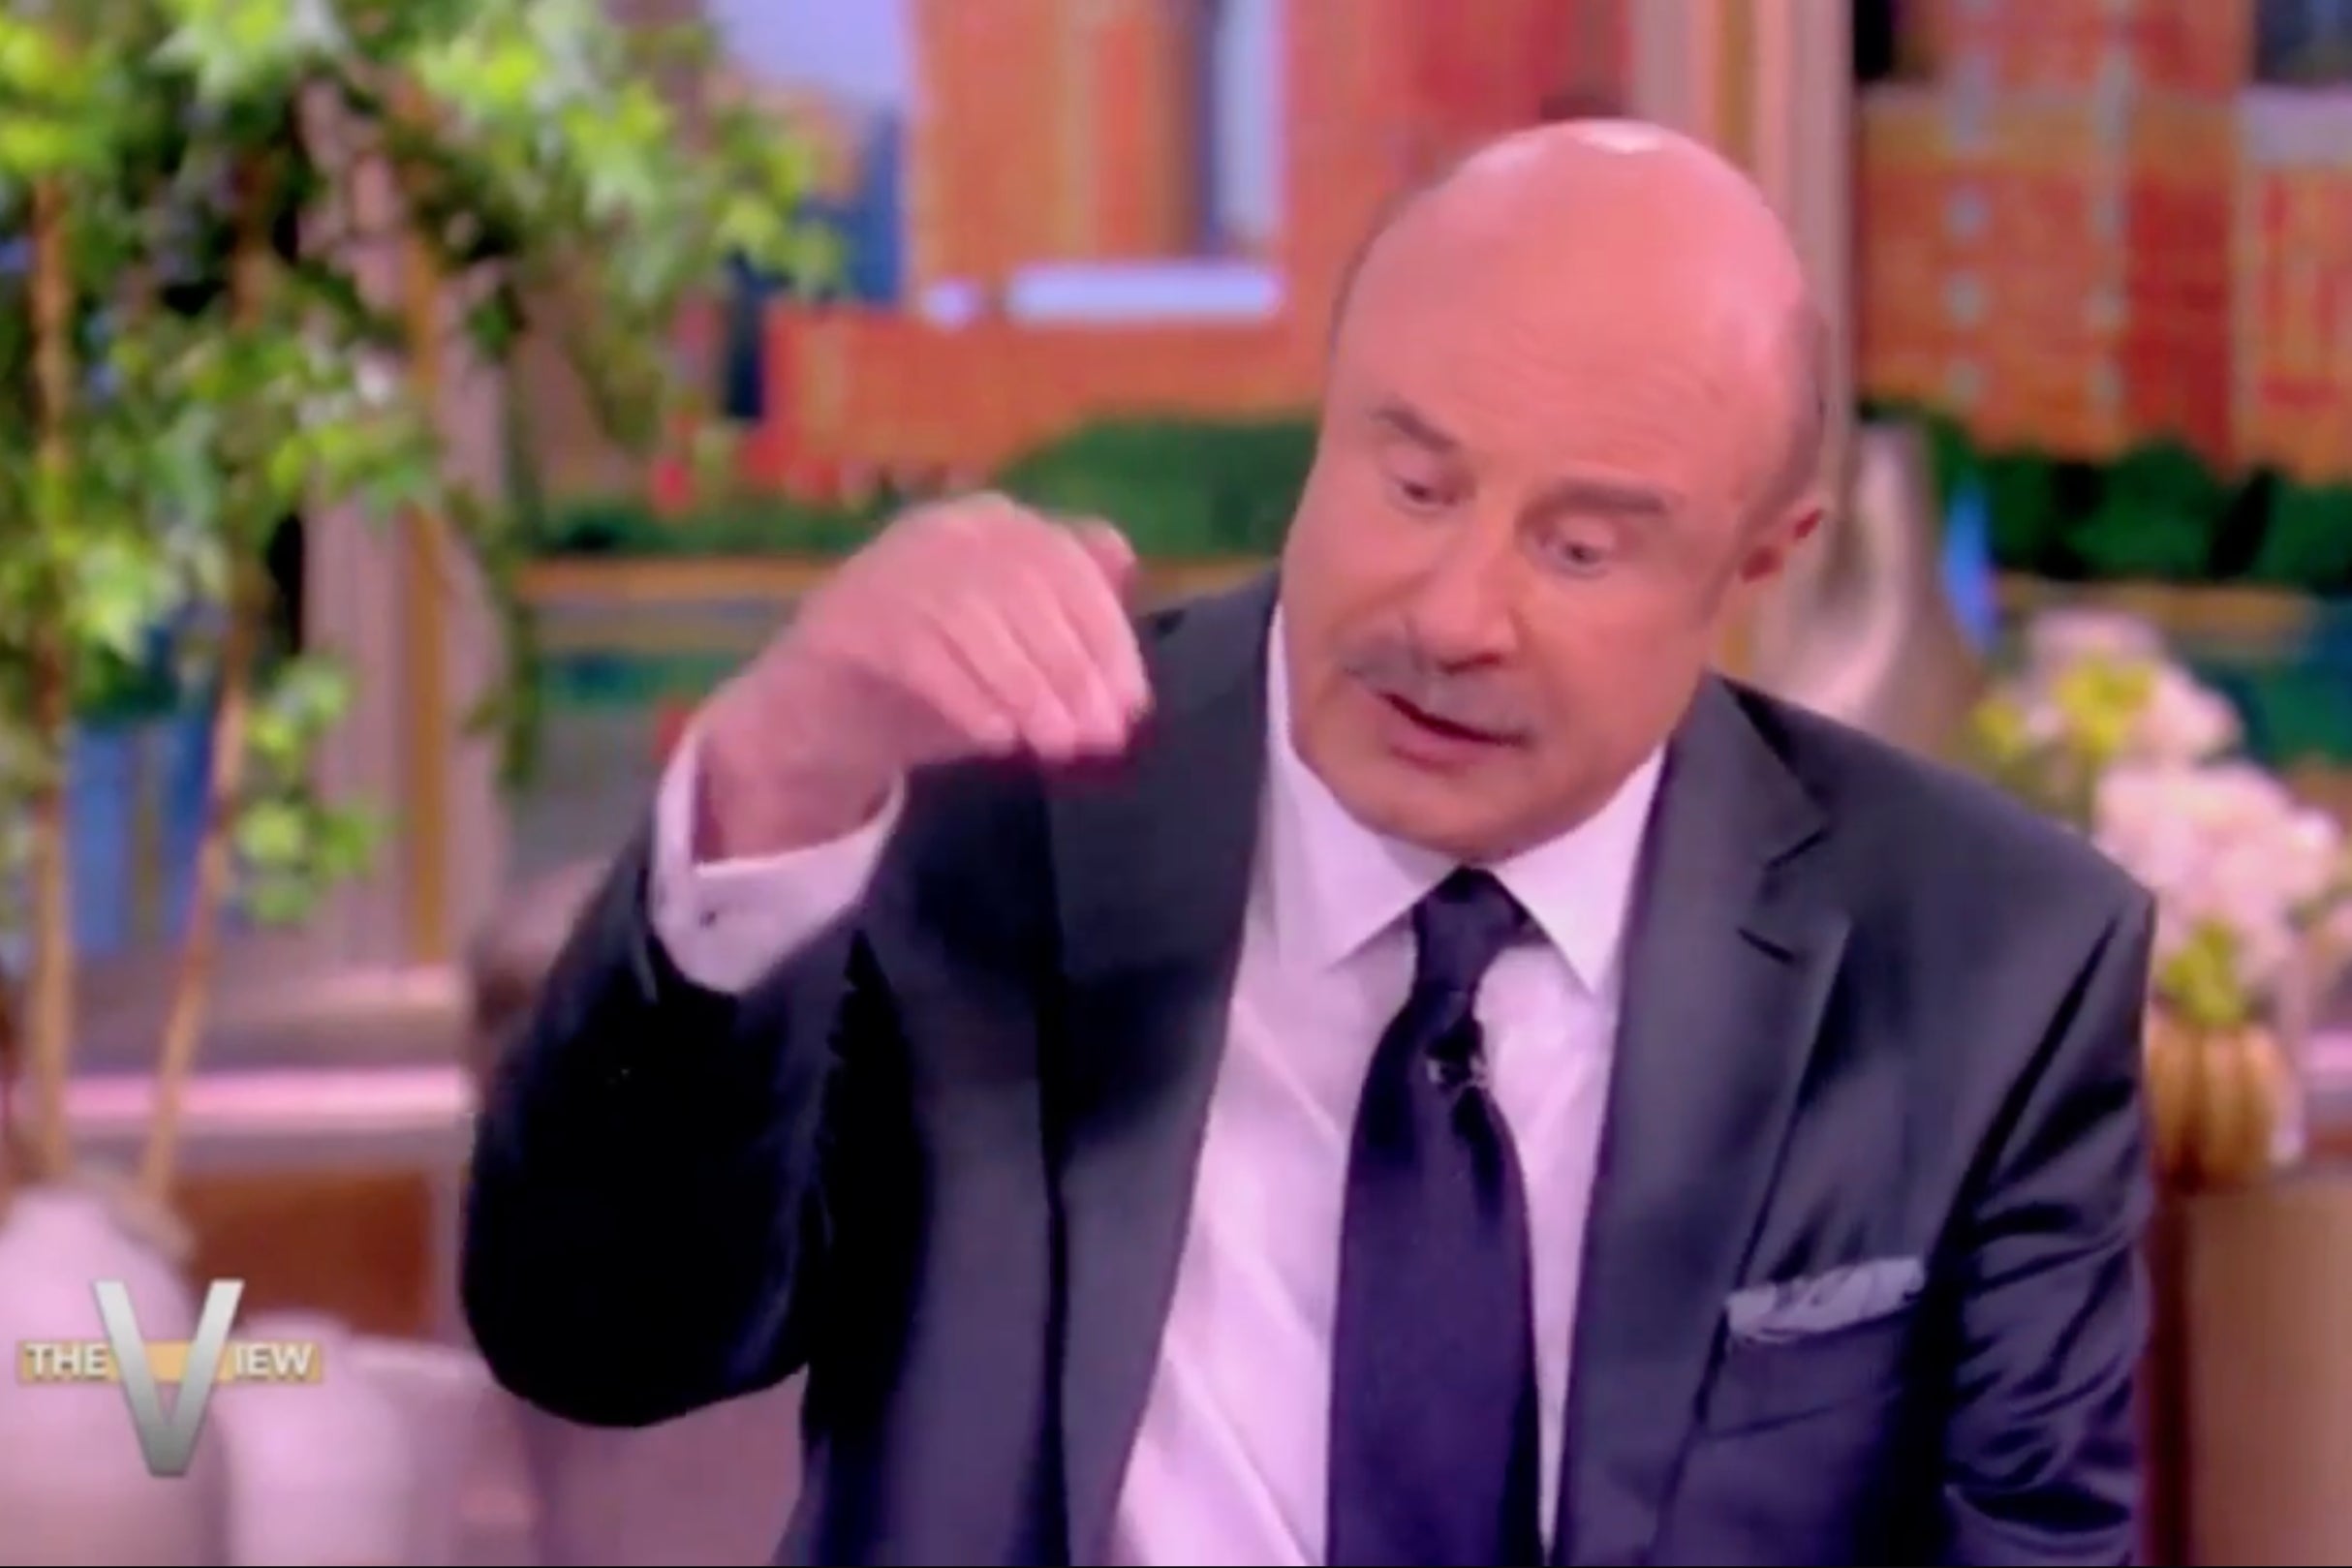 Dr Phil appearing on The View